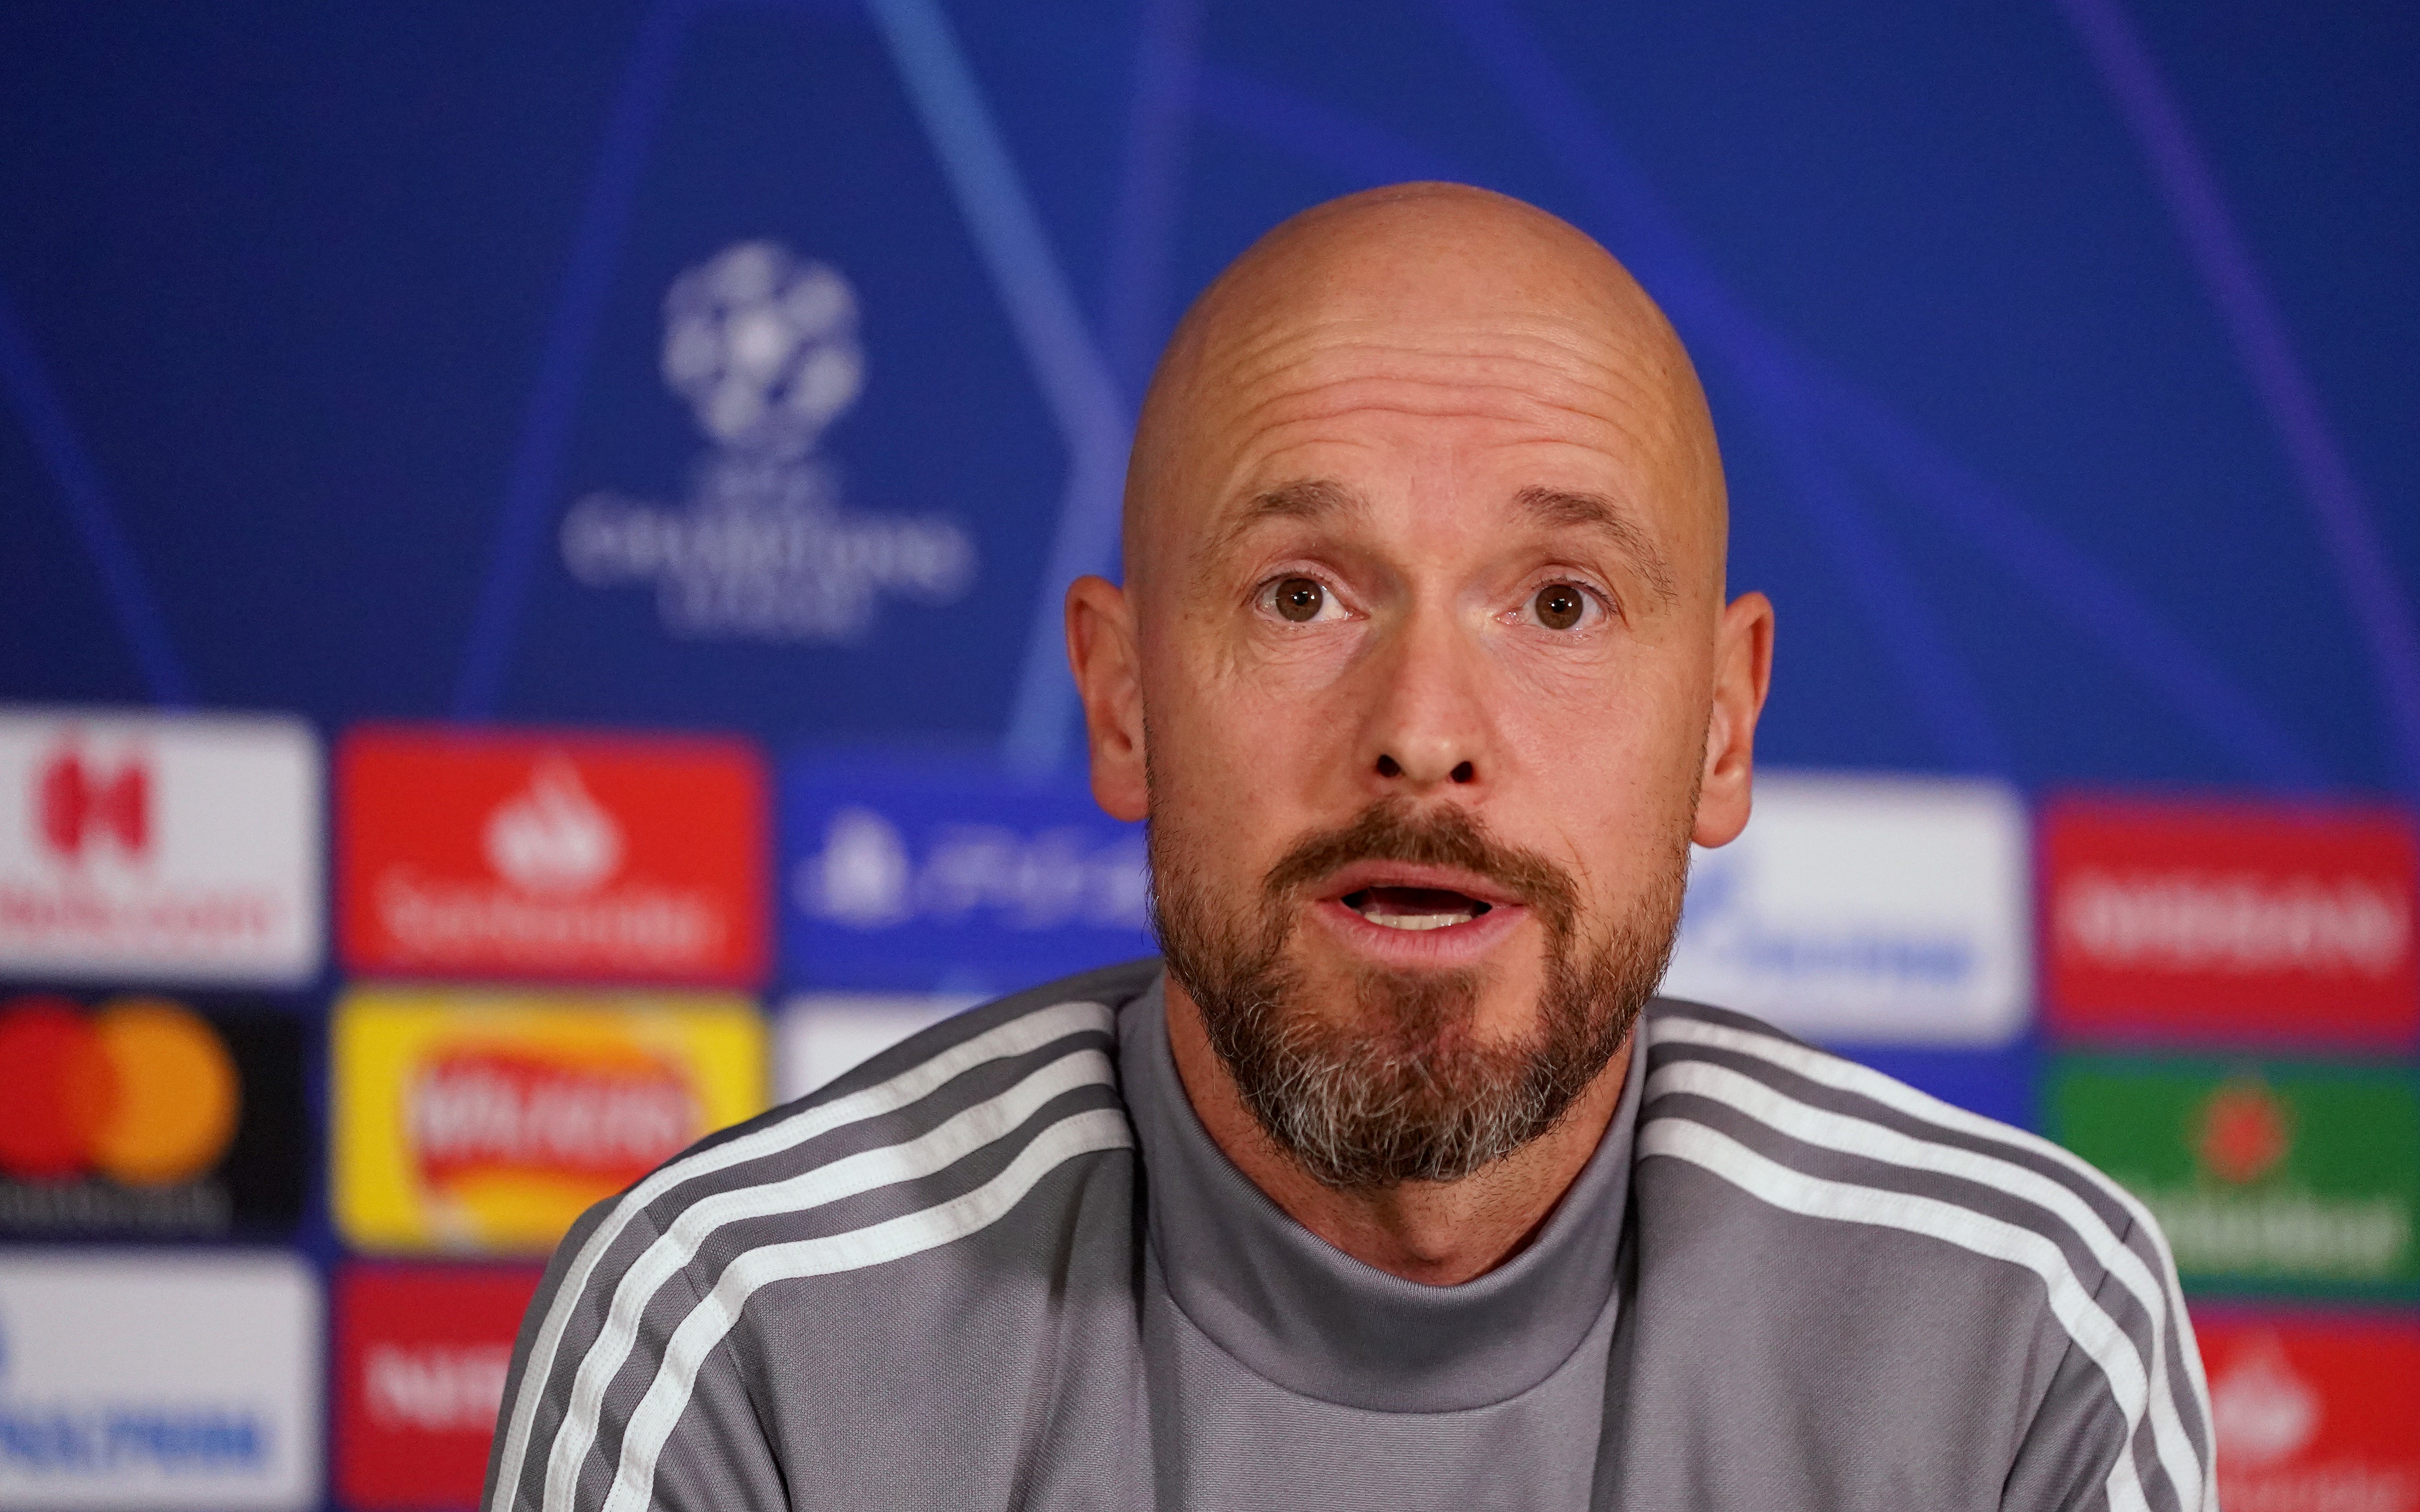 Erik ten Hag is believed to be Manchester United’s preferred candidate